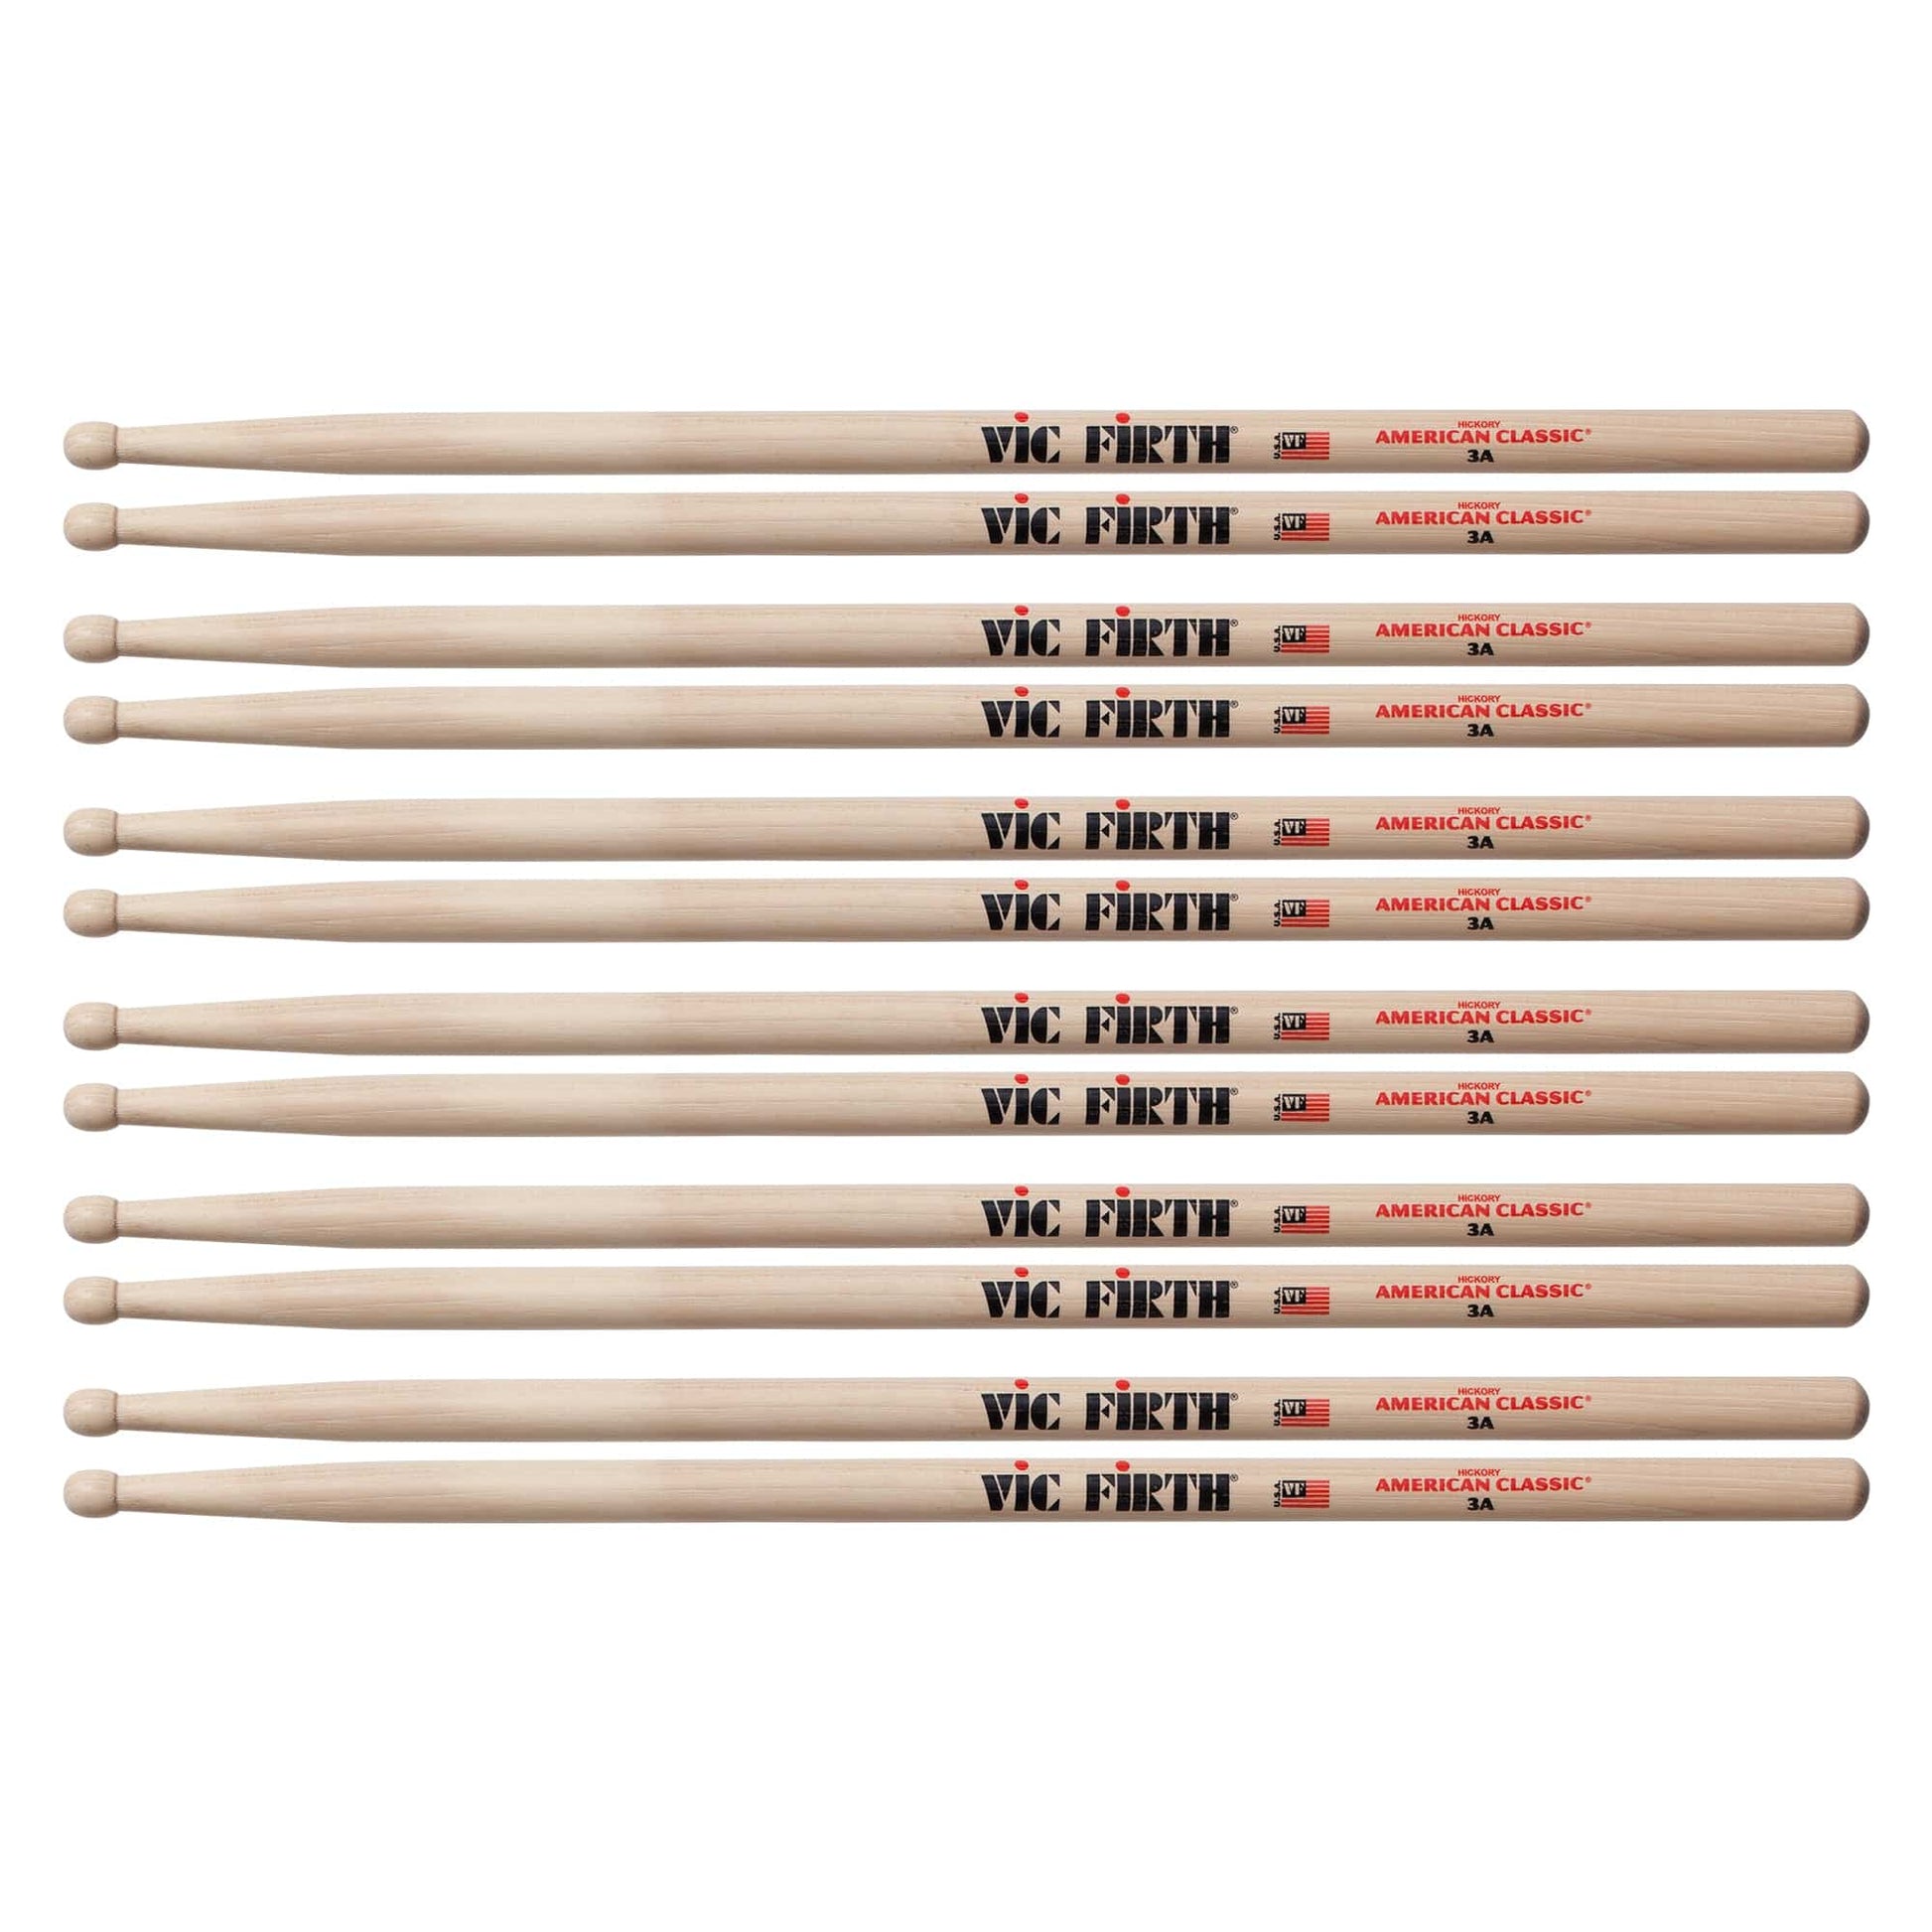 Vic Firth American Classic 3A Wood Tip Drum Sticks (6 Pair Bundle) Drums and Percussion / Parts and Accessories / Drum Sticks and Mallets